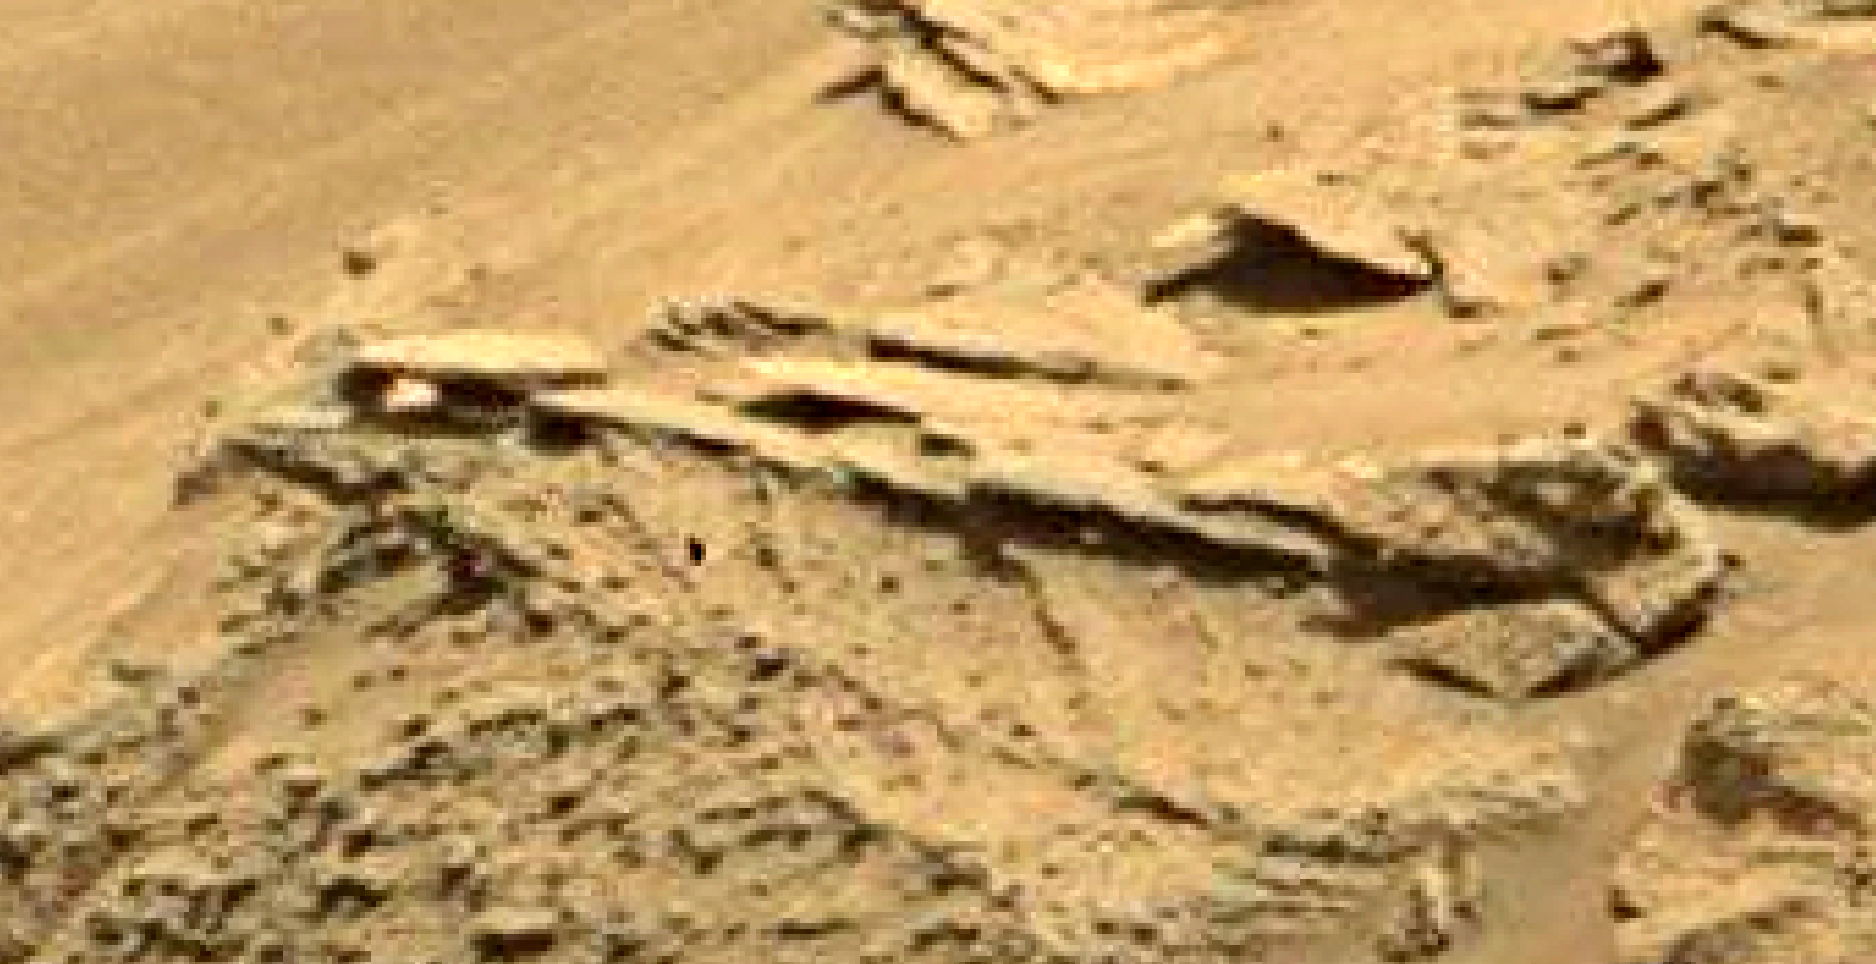 mars sol 1346 anomaly-artifacts 15 was life on mars